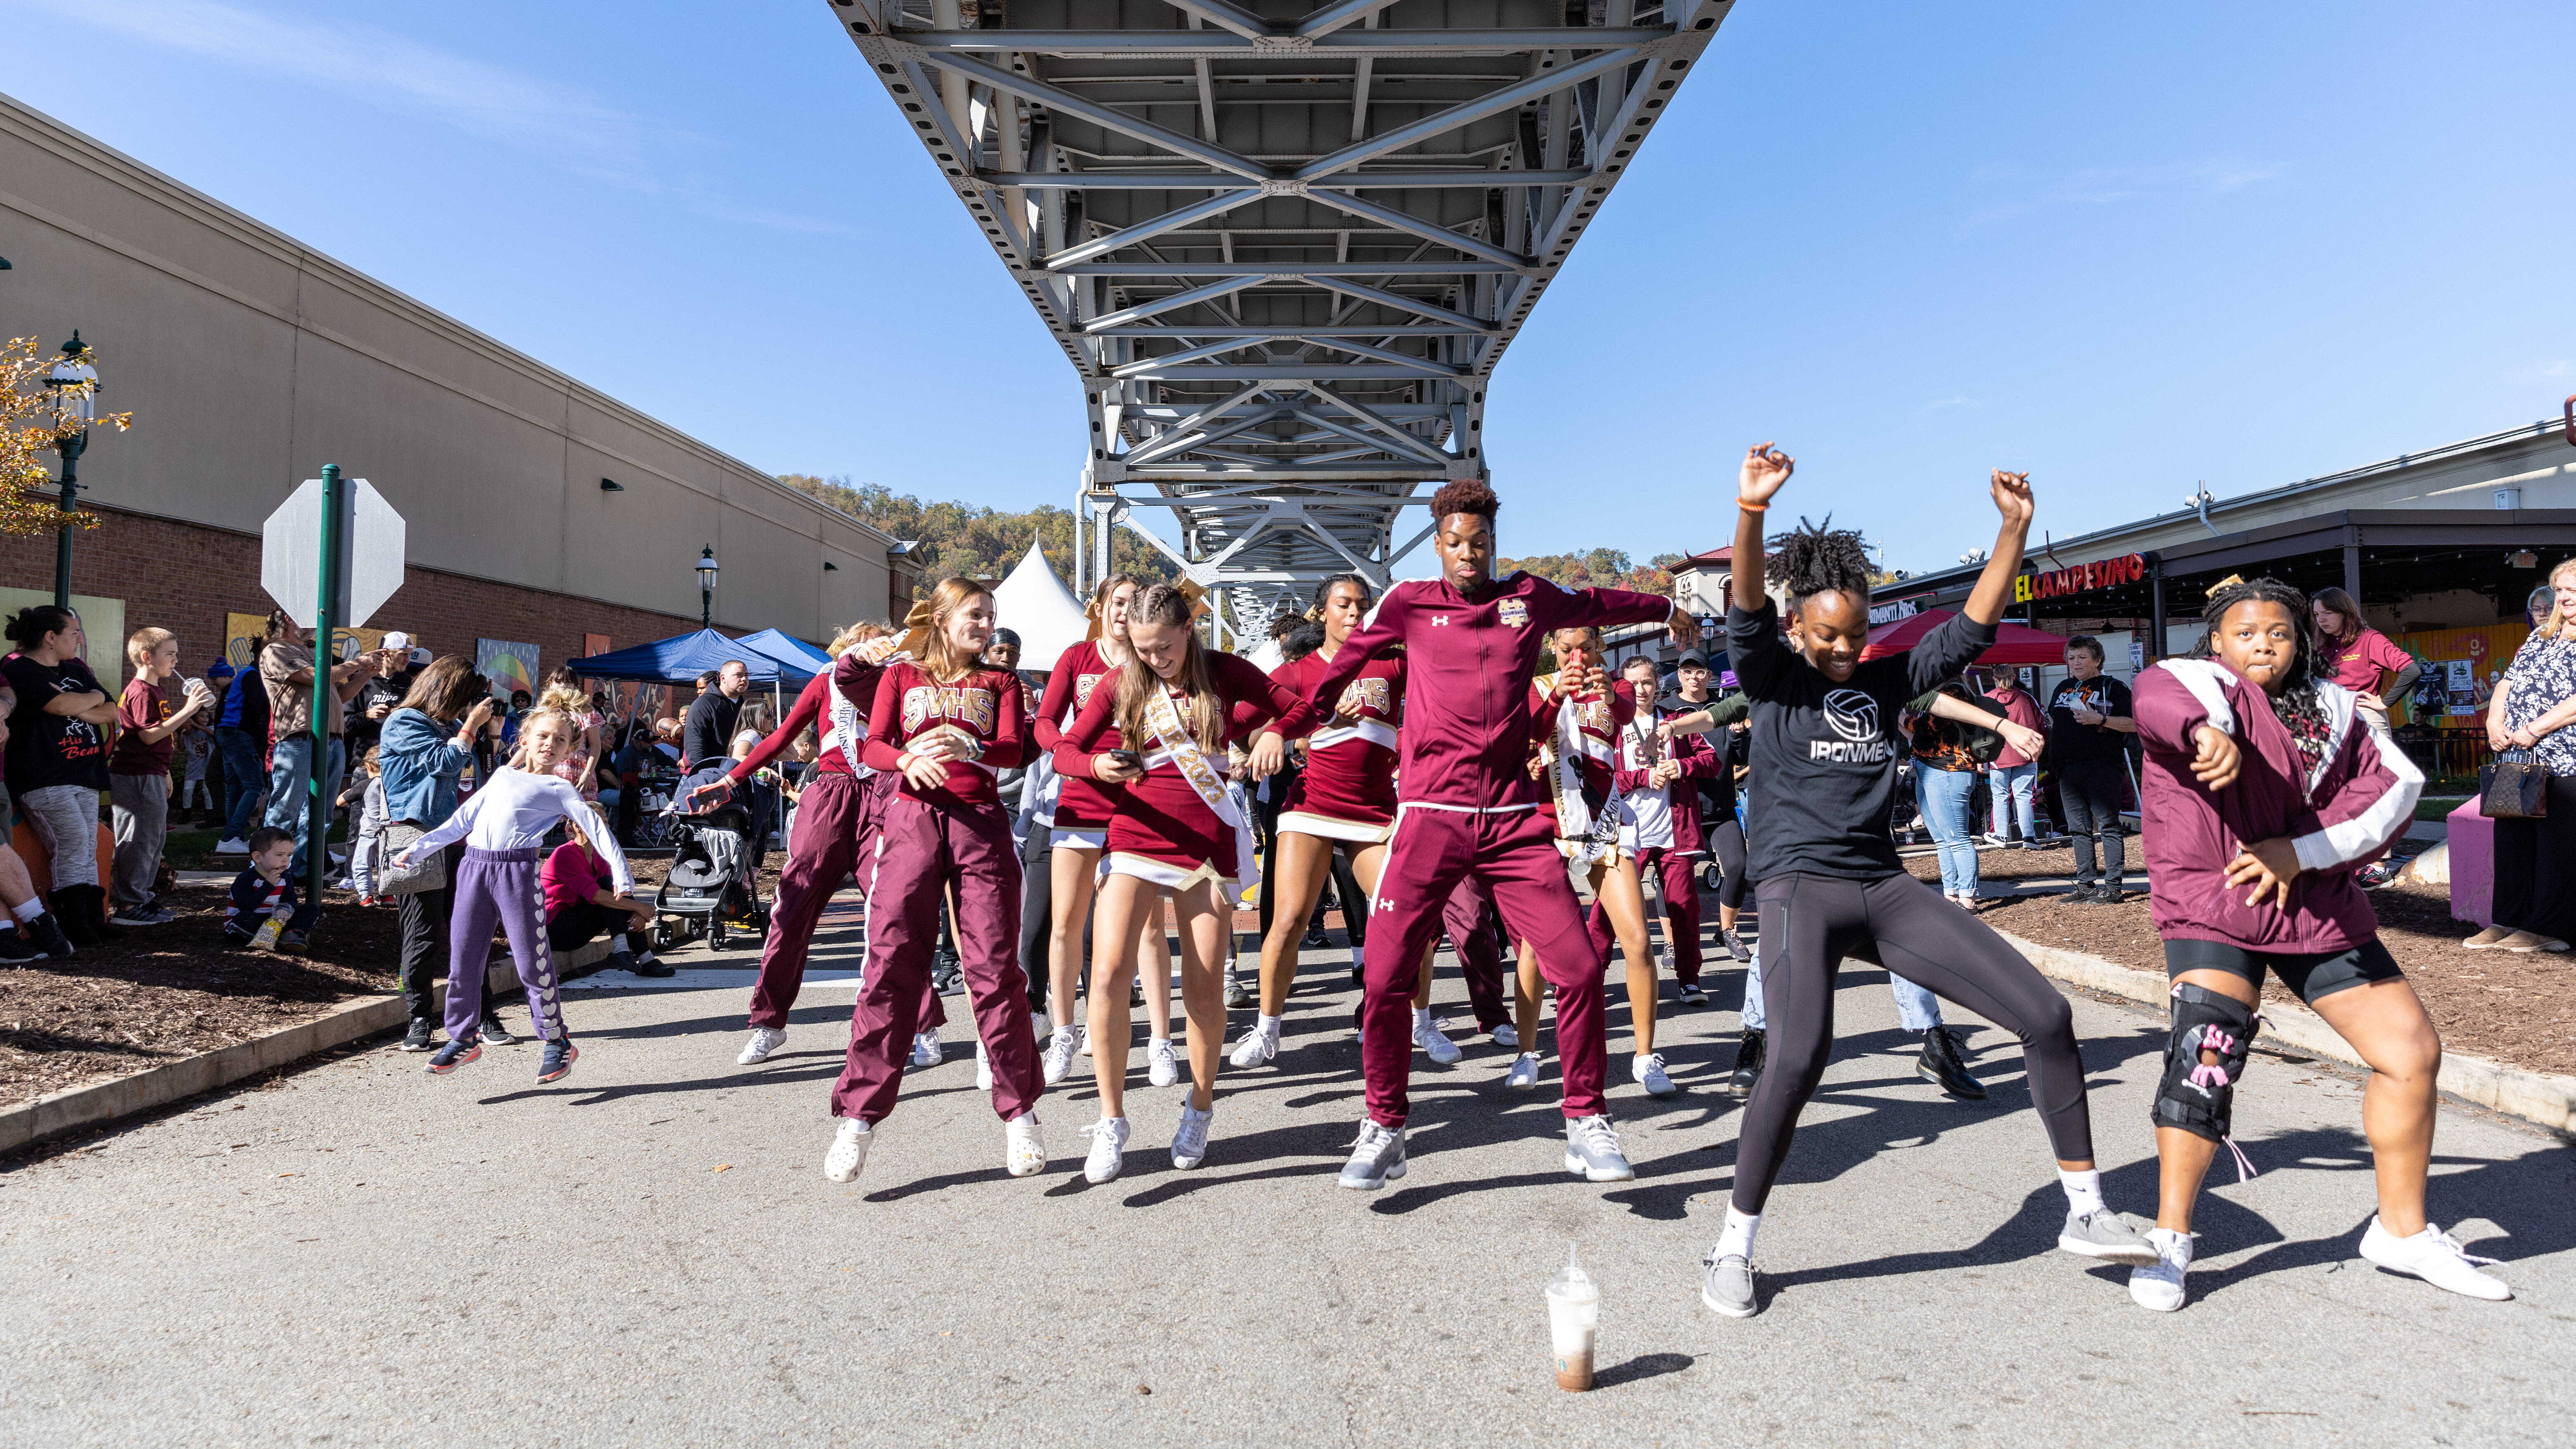  Steel Valley community supports academics, arts, athletics with Funder Under the Bridge